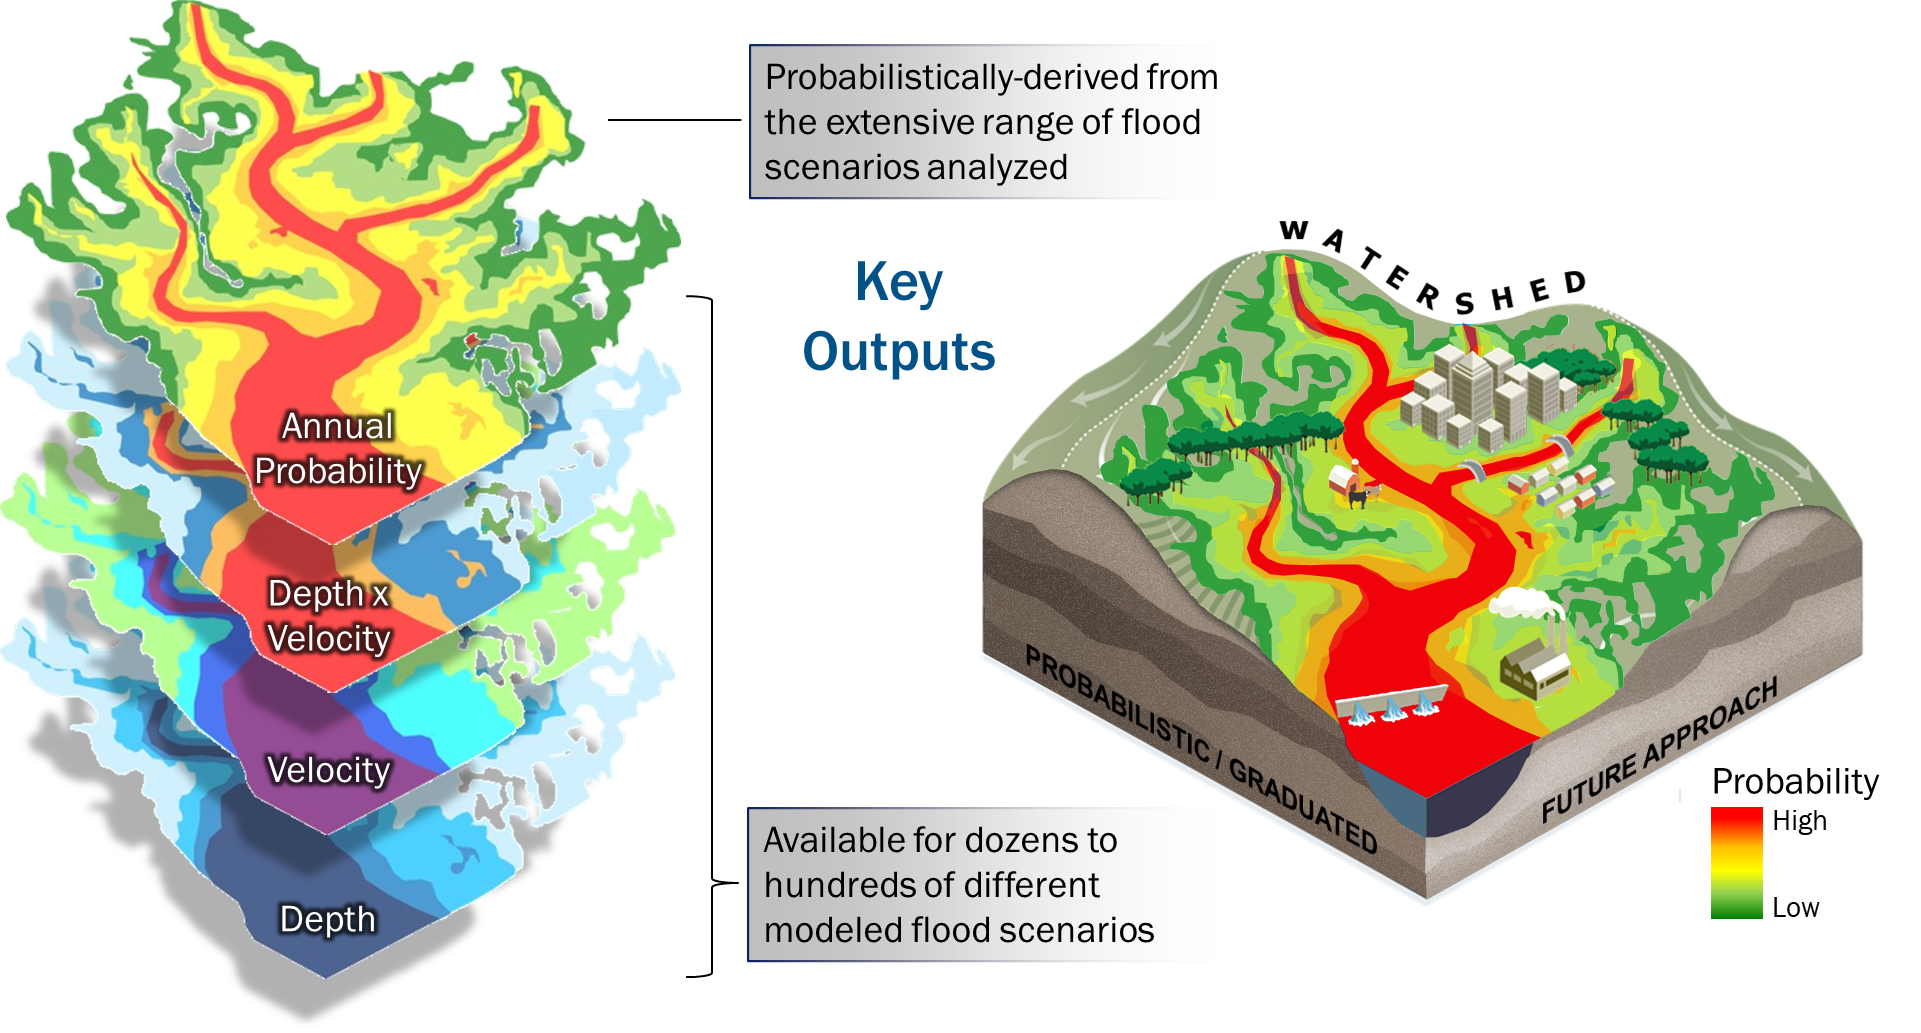 Conceptual diagram showing the probabilistically-derived outcomes produced by the Future of Flood Risk Data (FFRD) modeling sequence.